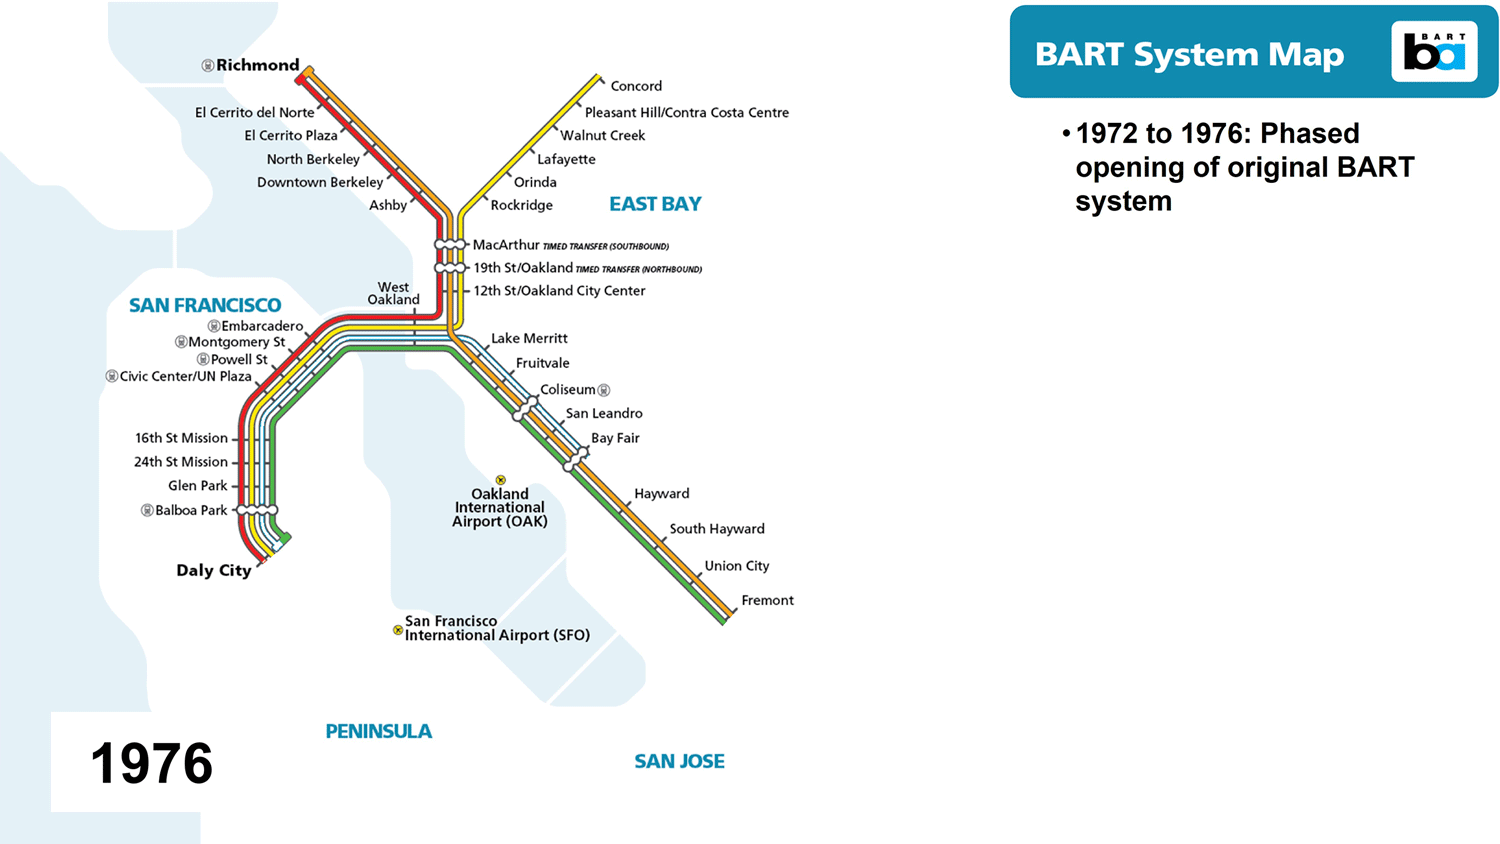 1972-1976 Phased opening of original BART system. 1995 North Concord/Martinez Station Opens. 1996 Colma and Pittsburgh/Bay Point Stations open. 1997 Dublin/Pleasanton line opens. 2003 Millbrae extension opens, including connection to SFO airport. 2014 service to OAK airport beings. 2017 Warm Springs/South Fremont Station opens. 2018 eBART/BART Antioch opens. 2020 VTA's BART Silicon Valley Phase I Opens. Coming soon is VTA's BART Silicon Valley Phase II Extension 